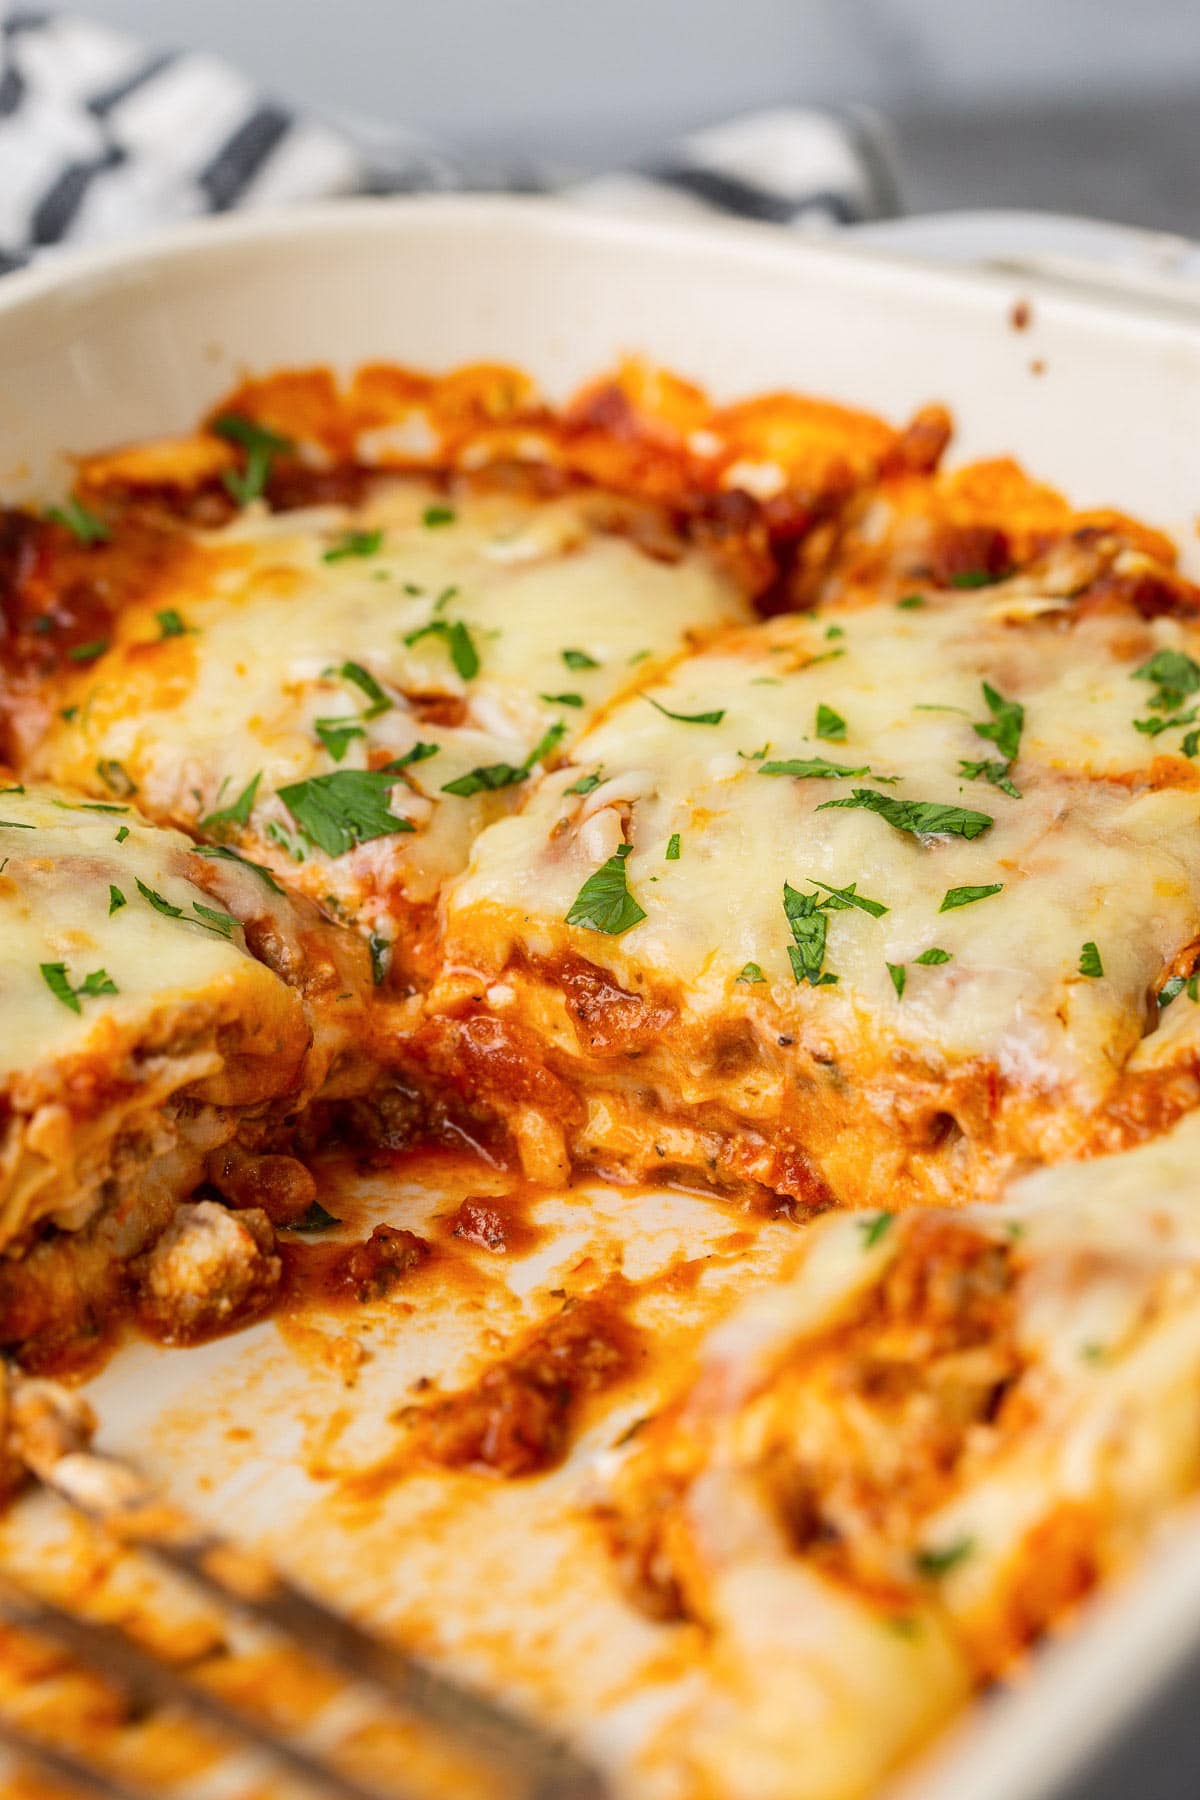 Ravioli lasagna bake in a white 9x13 casserole dish topped with freshly chopped parsley.